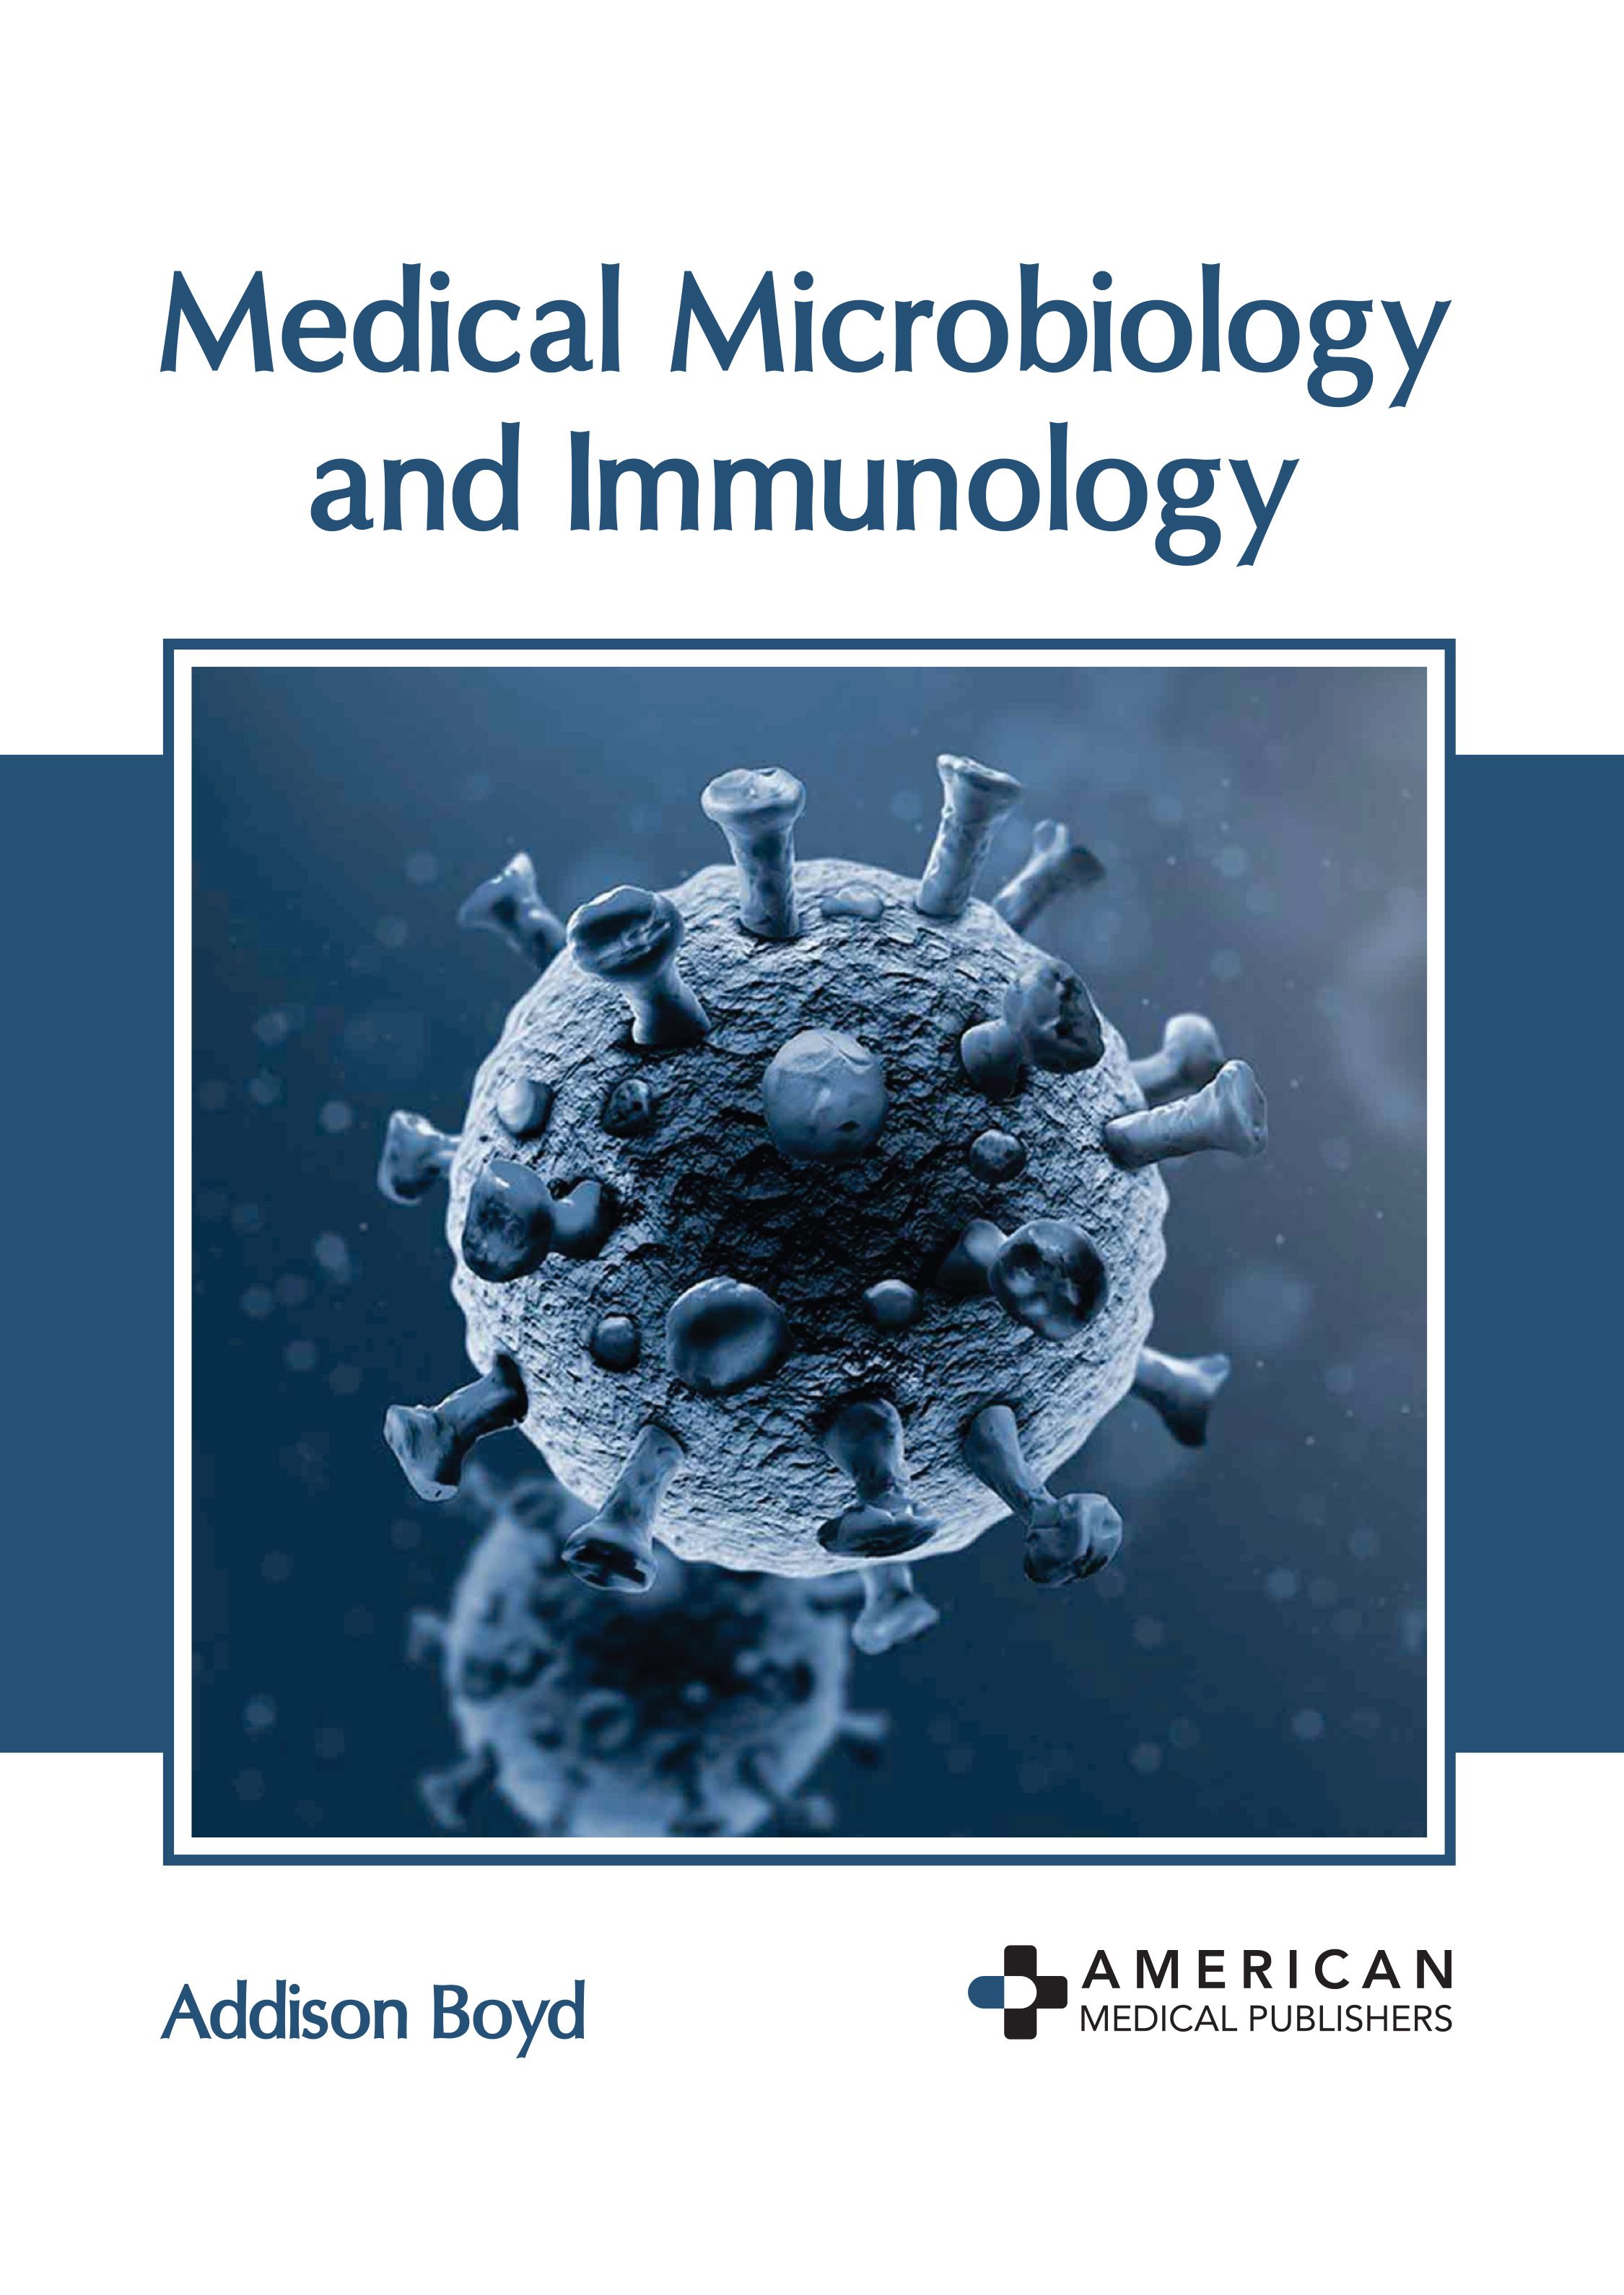 MEDICAL MICROBIOLOGY AND IMMUNOLOGY